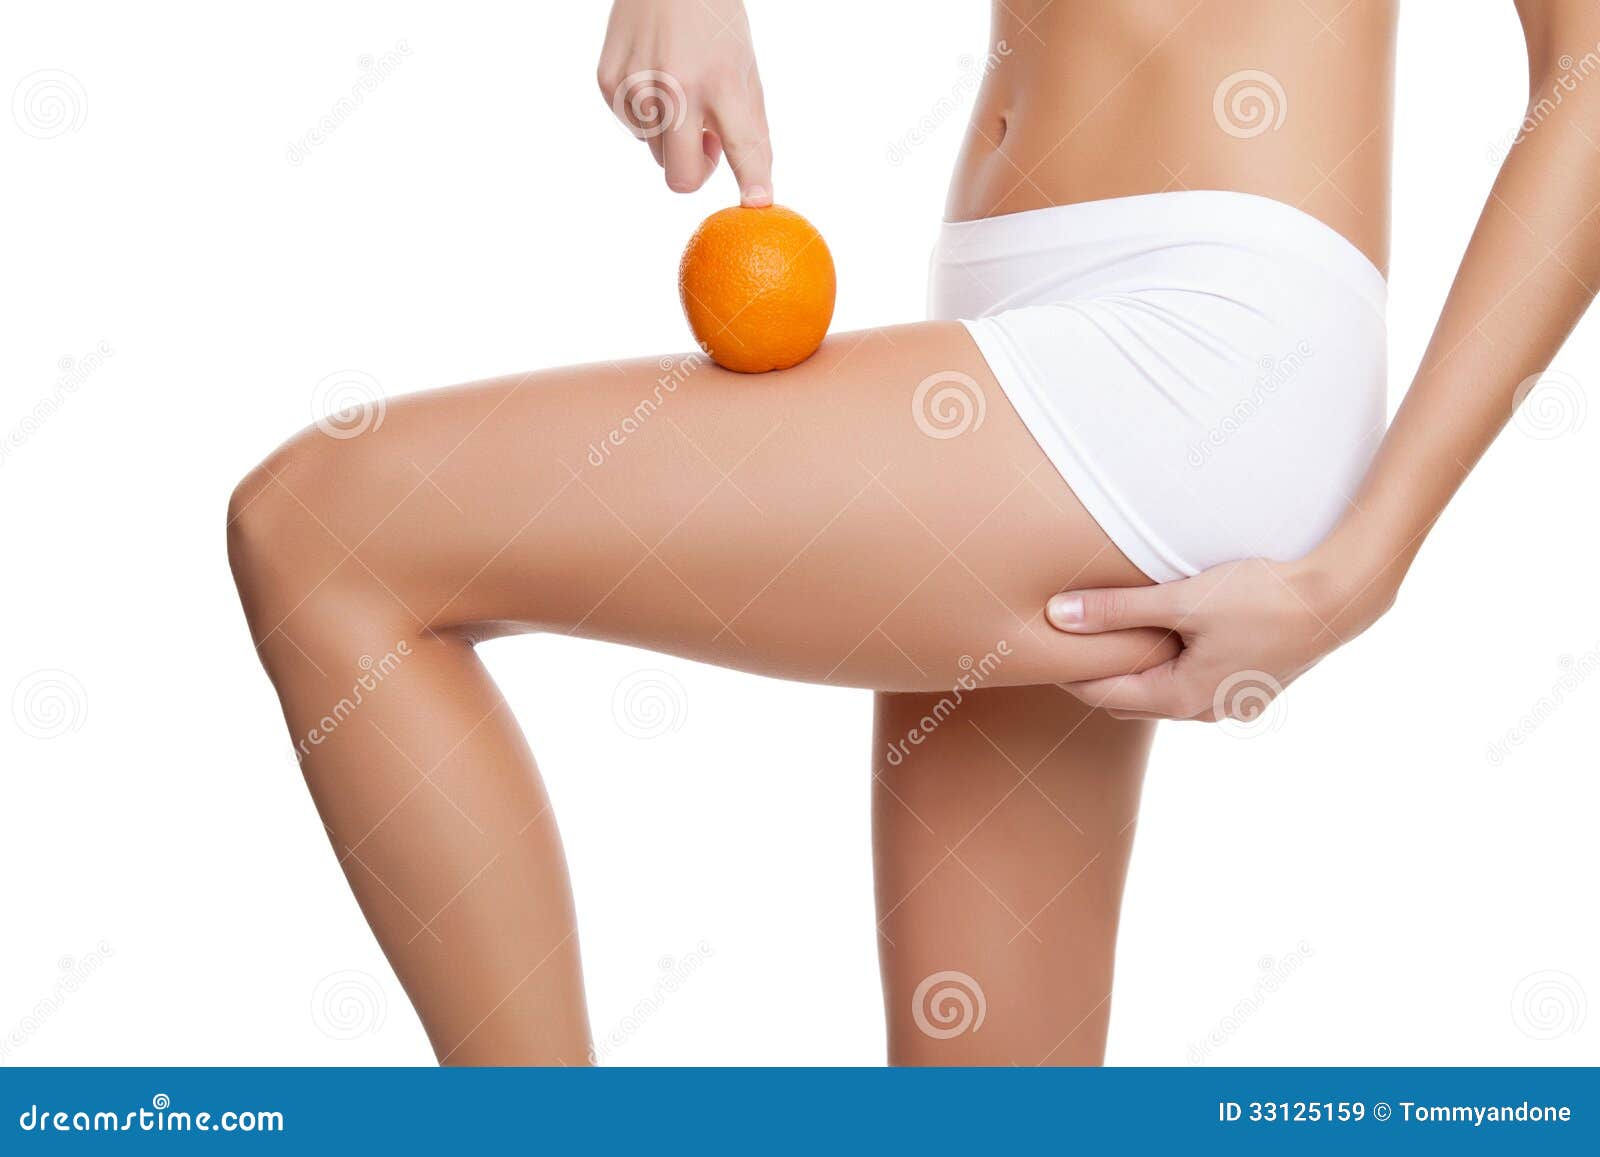 woman with an orange showing a perfect skin